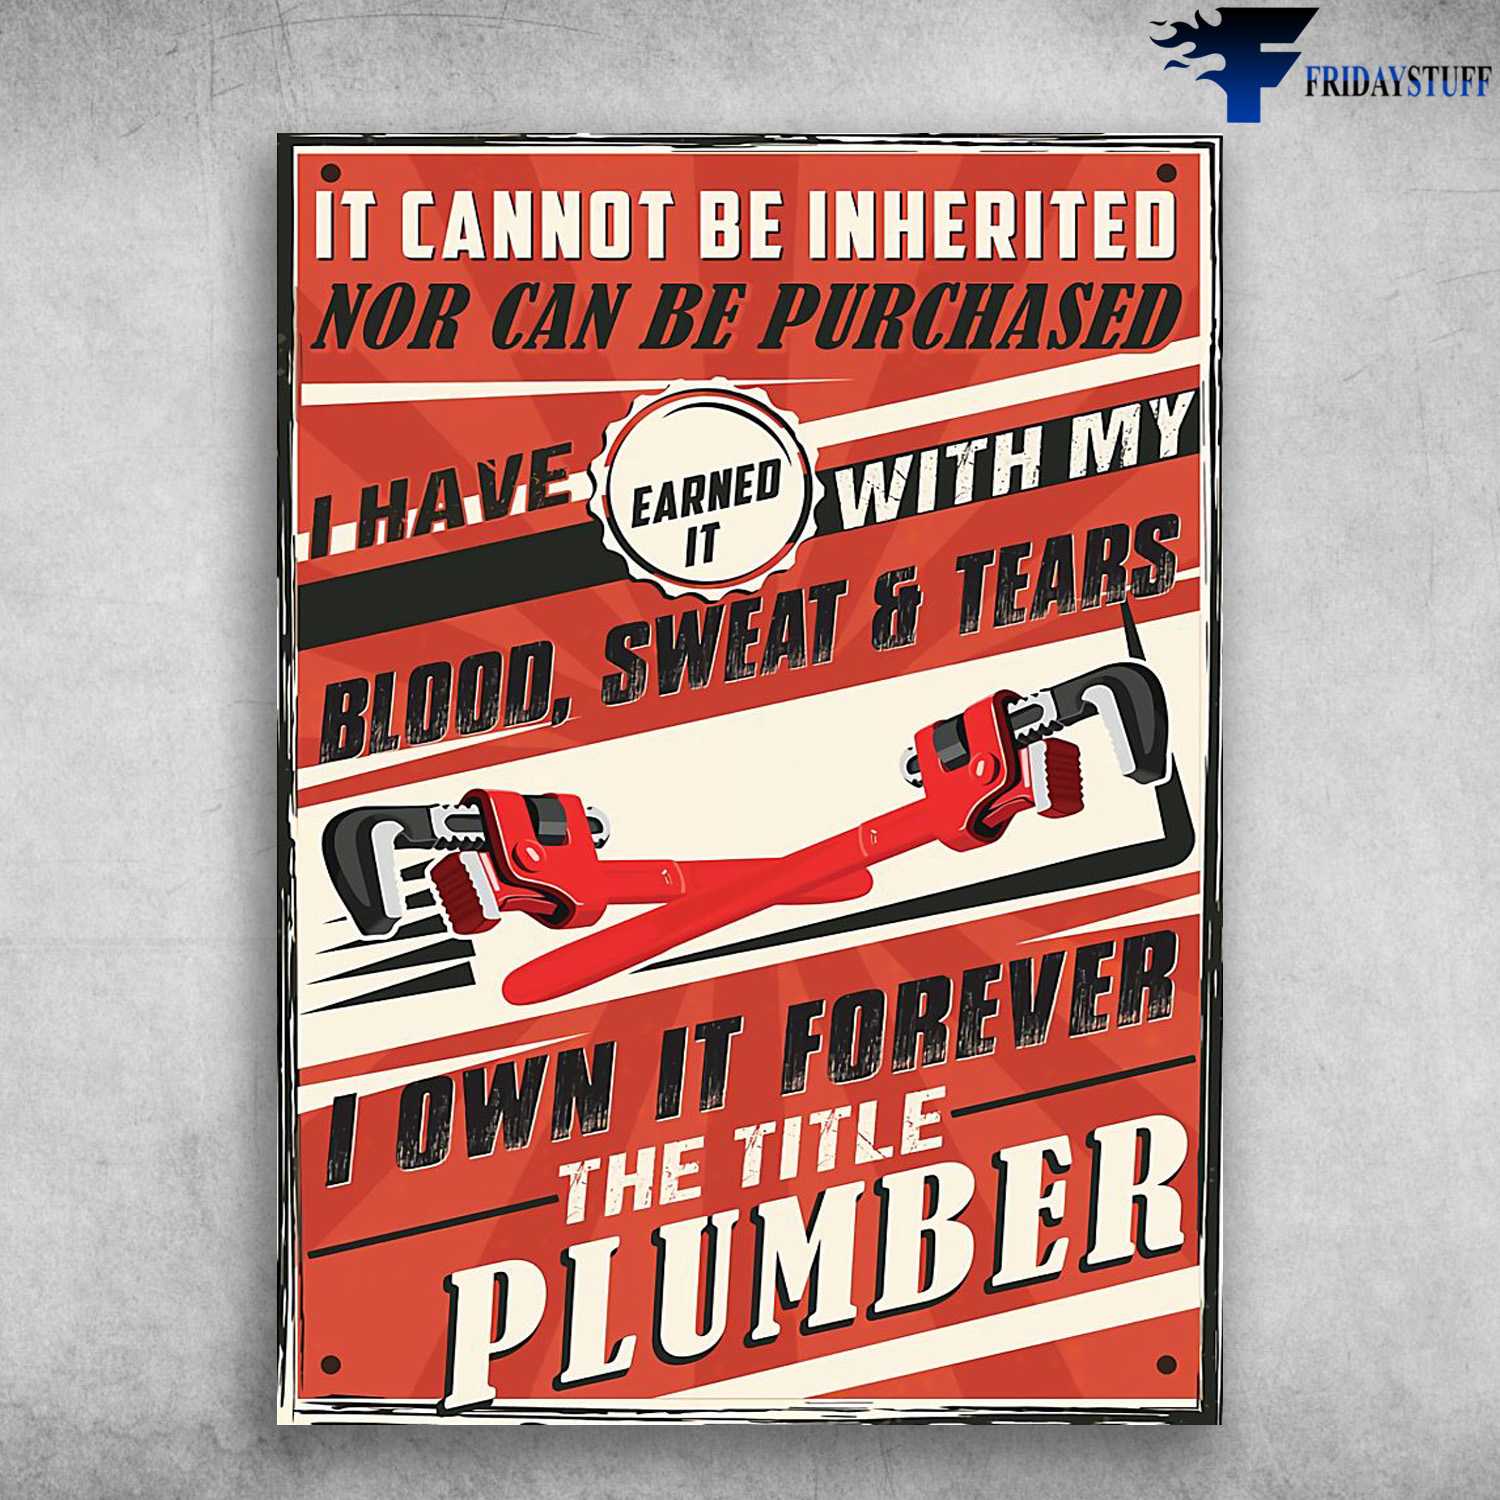 Plumber Poster, Plumber Gift, It Cannot Be Inherited, Nor Can Be Purchased, I Have Earned It, With My Blood, Sweat And Tears, I Own It Forever, The Title Plumber